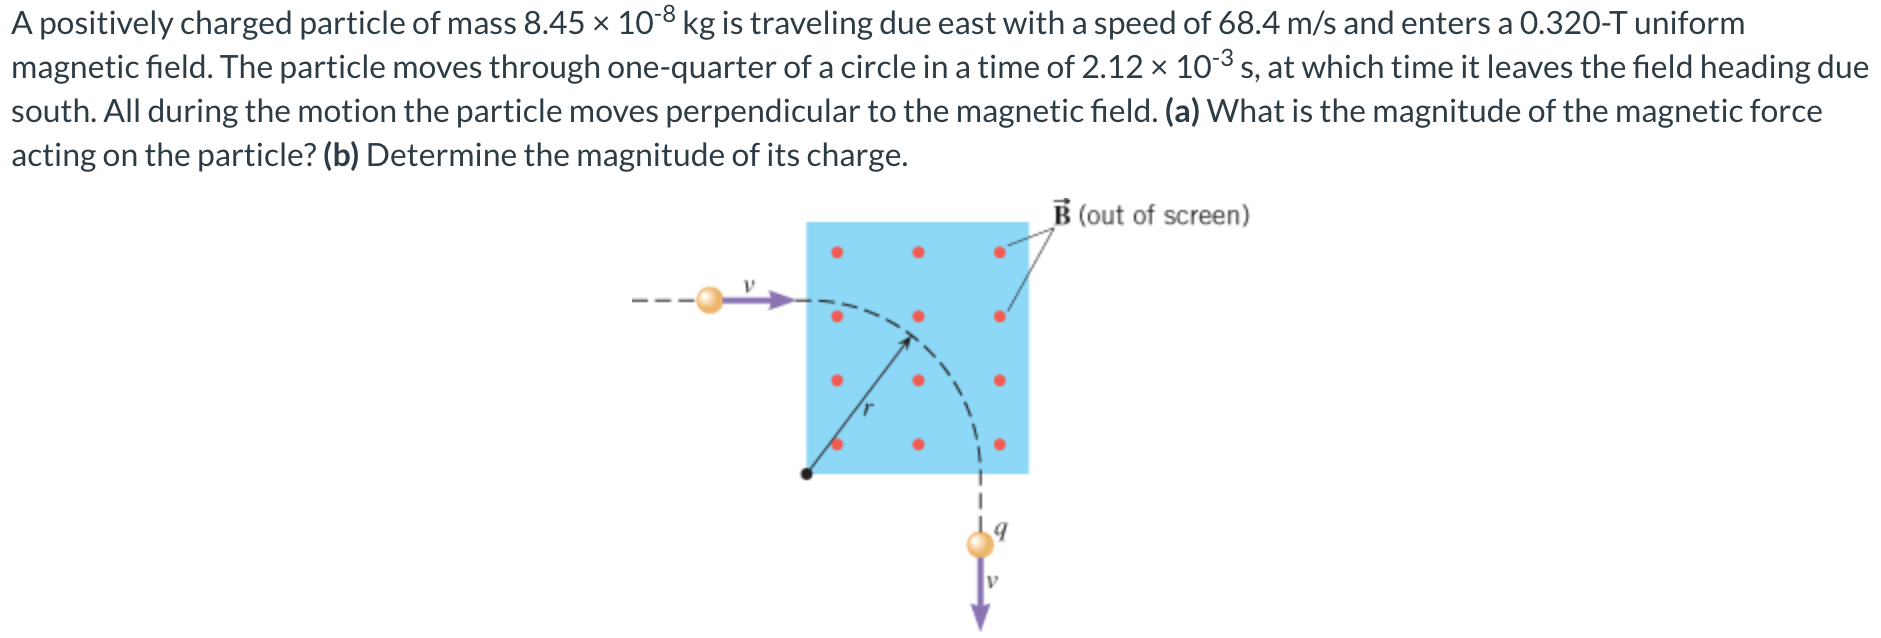 A positively charged particle of mass 8.45×10−8 kg is traveling due east with a speed of 68.4 m/s and enters a 0.320−T uniform magnetic field. The particle moves through one-quarter of a circle in a time of 2.12×10−3 s, at which time it leaves the field heading due south. All during the motion the particle moves perpendicular to the magnetic field. (a) What is the magnitude of the magnetic force acting on the particle? (b) Determine the magnitude of its charge.